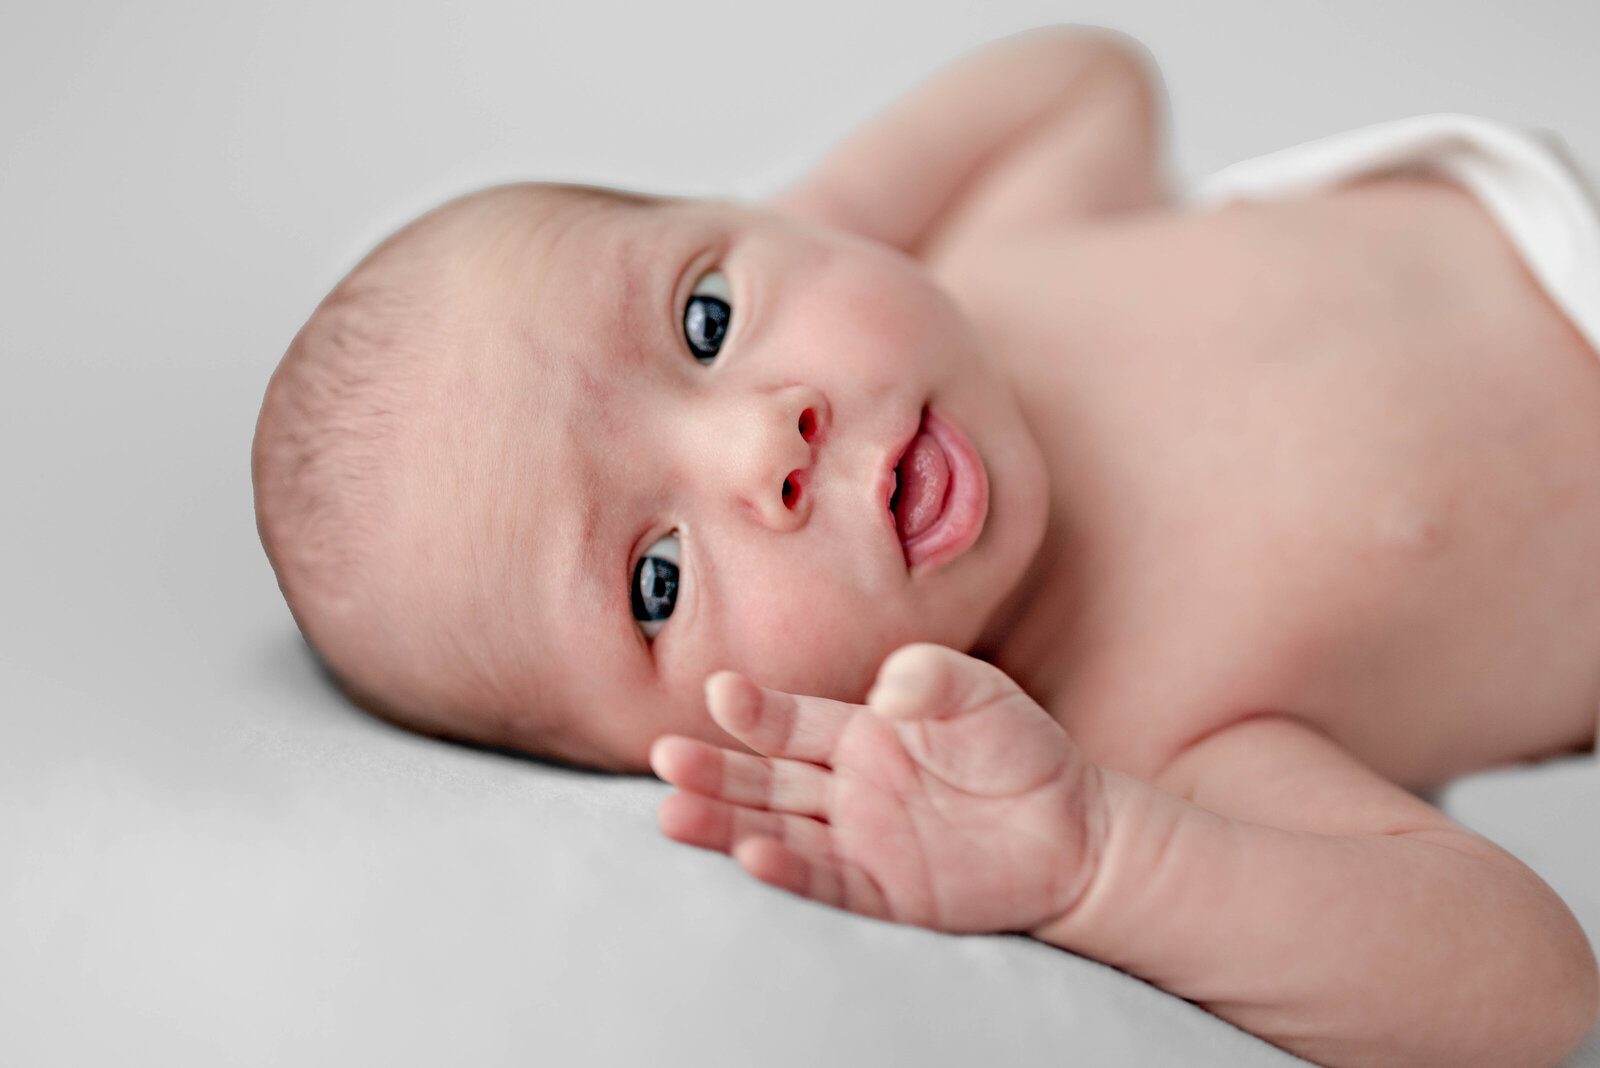 A newborn  baby looks at the camera and appears to wave  during his newborn photoshoot at a studio in Huntsville Alabama